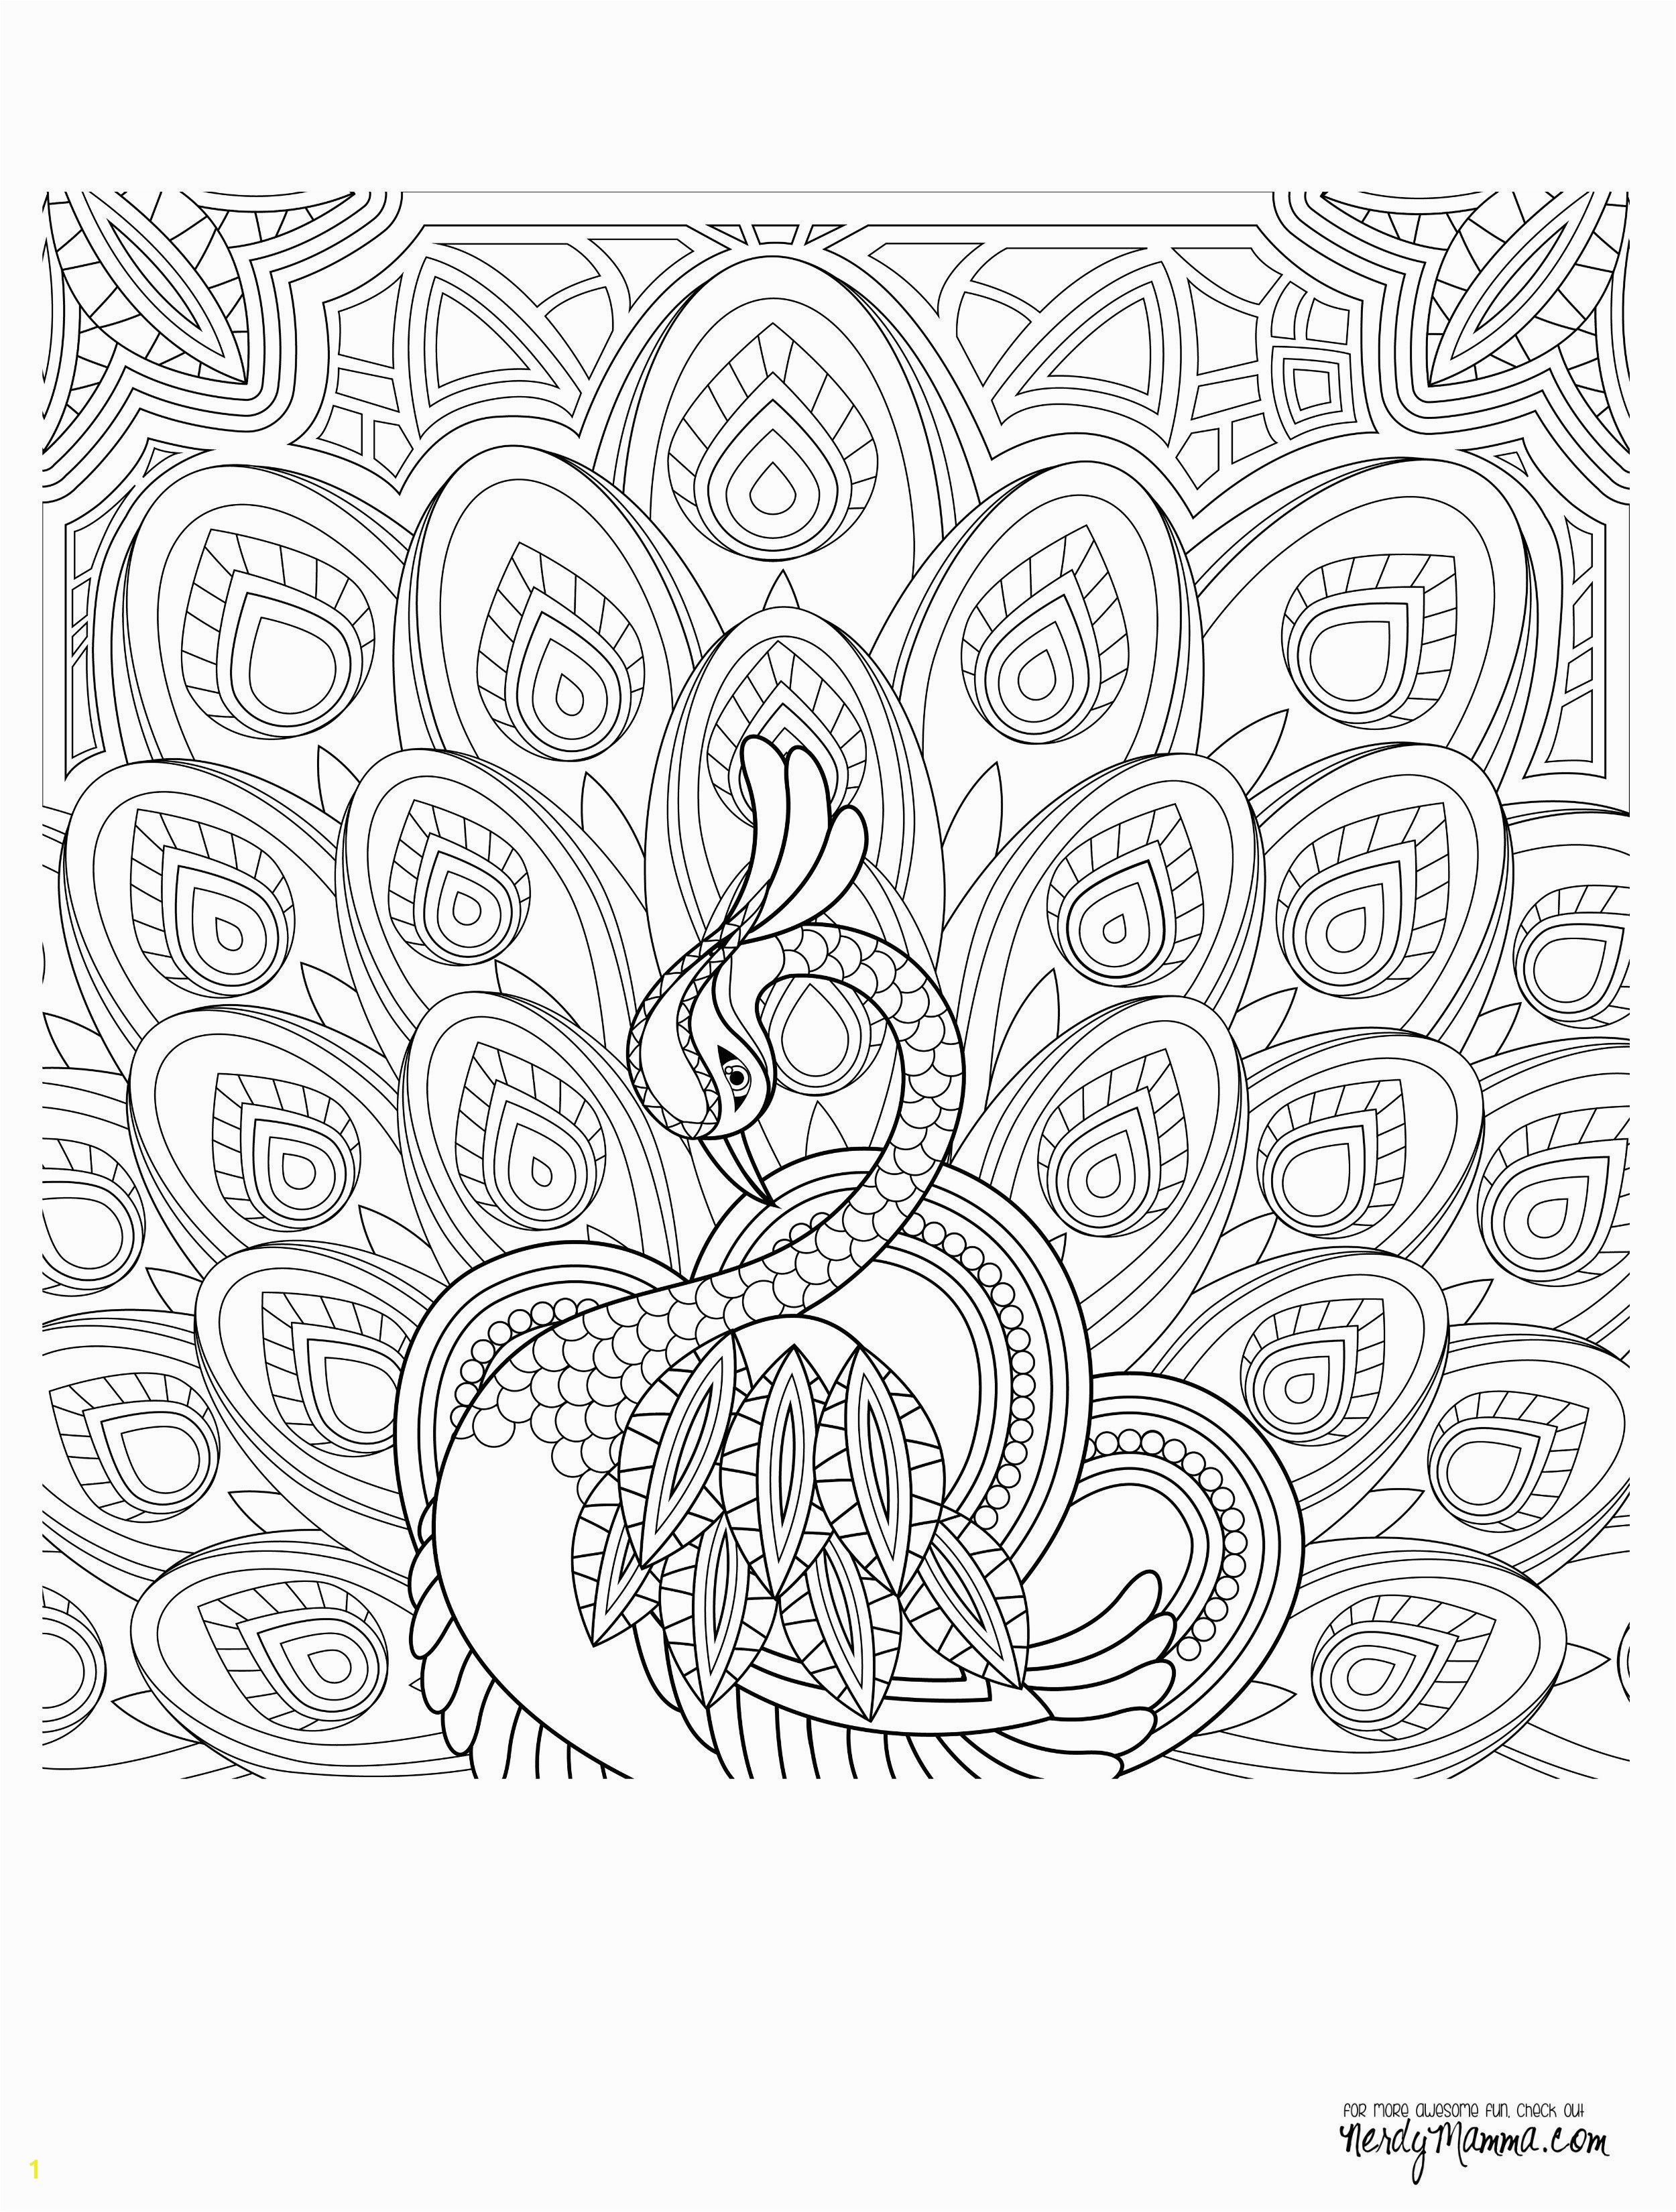 Printable Cool Coloring Page Unique Witch Coloring Pages New Crayola Pages 0d